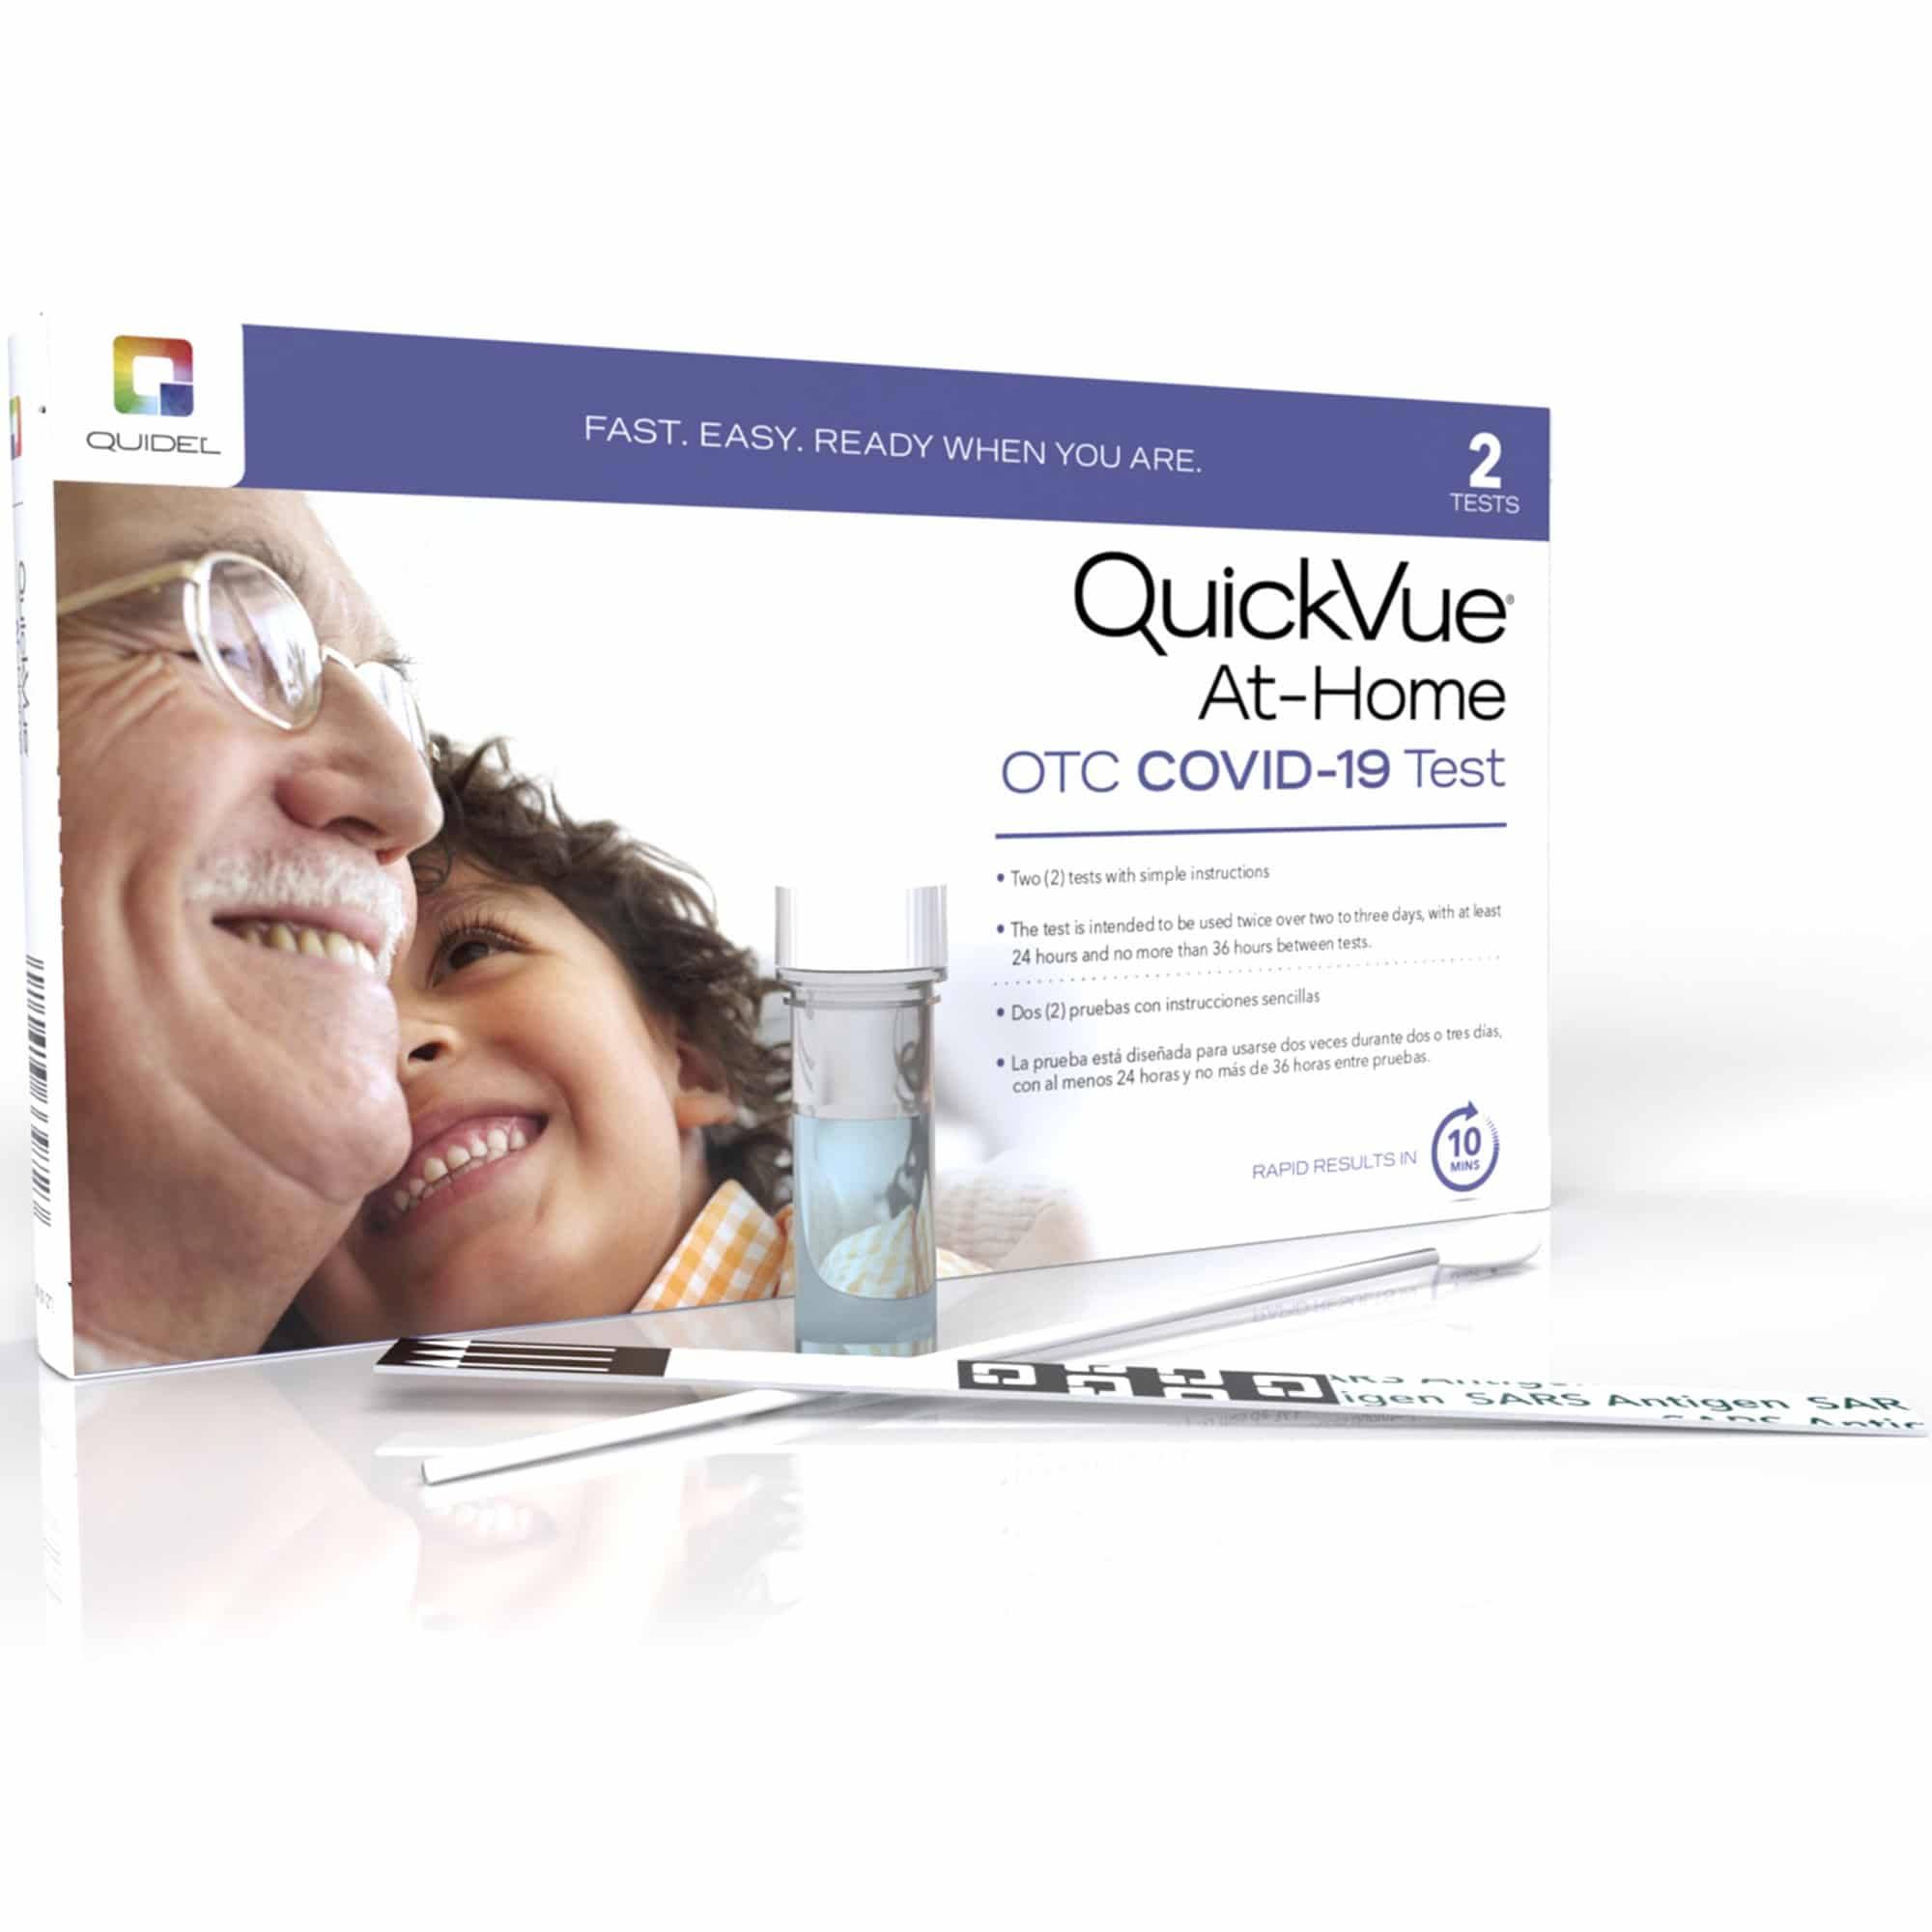 Quidel QuickVue At-home OTC Covid-19 Test Kit, Self-Collected Nasal Swab Sample, 10 Minute Rapid Results - Pack of 3 Kits